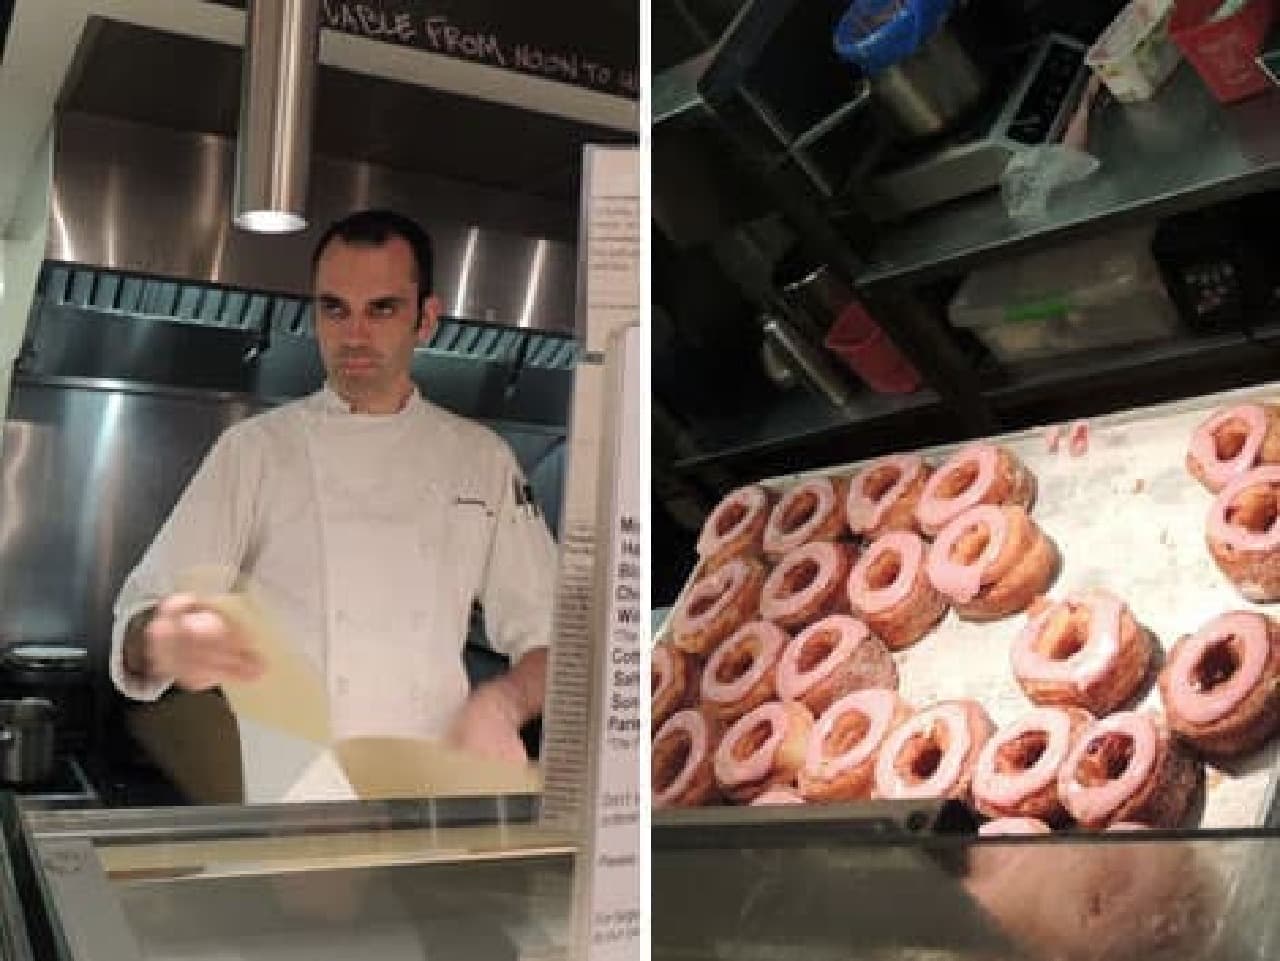 Schonfeld gets the cronuts three hours after lining up (Source: First We Feast)